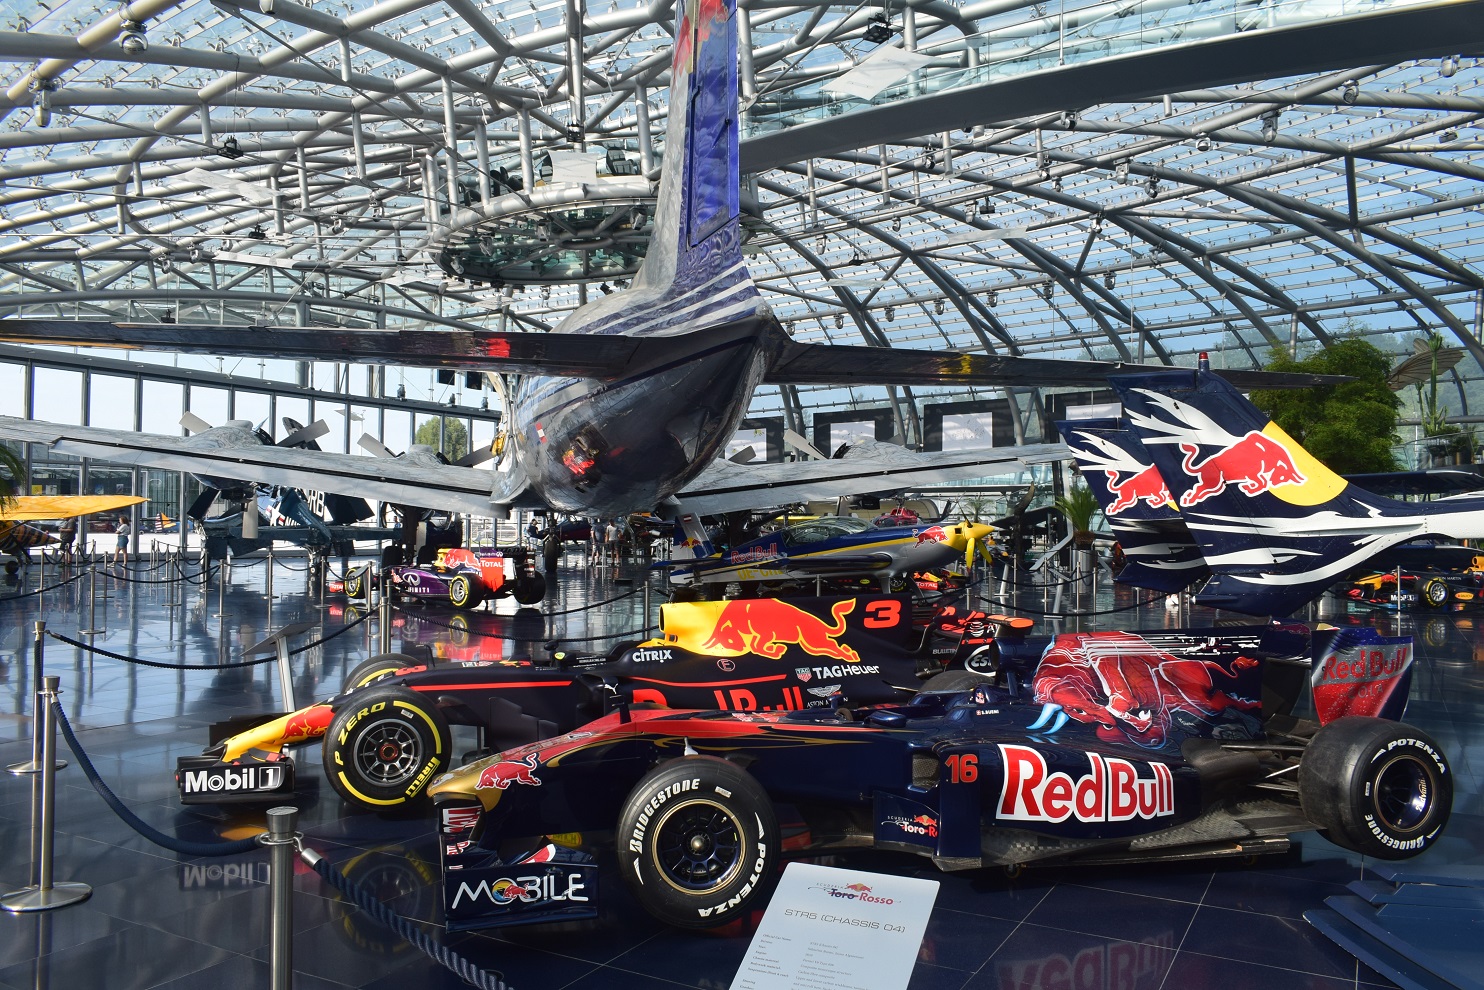 At Hangar 7 the private collection of the Red Bull founder resurrects the inner child in all of us |